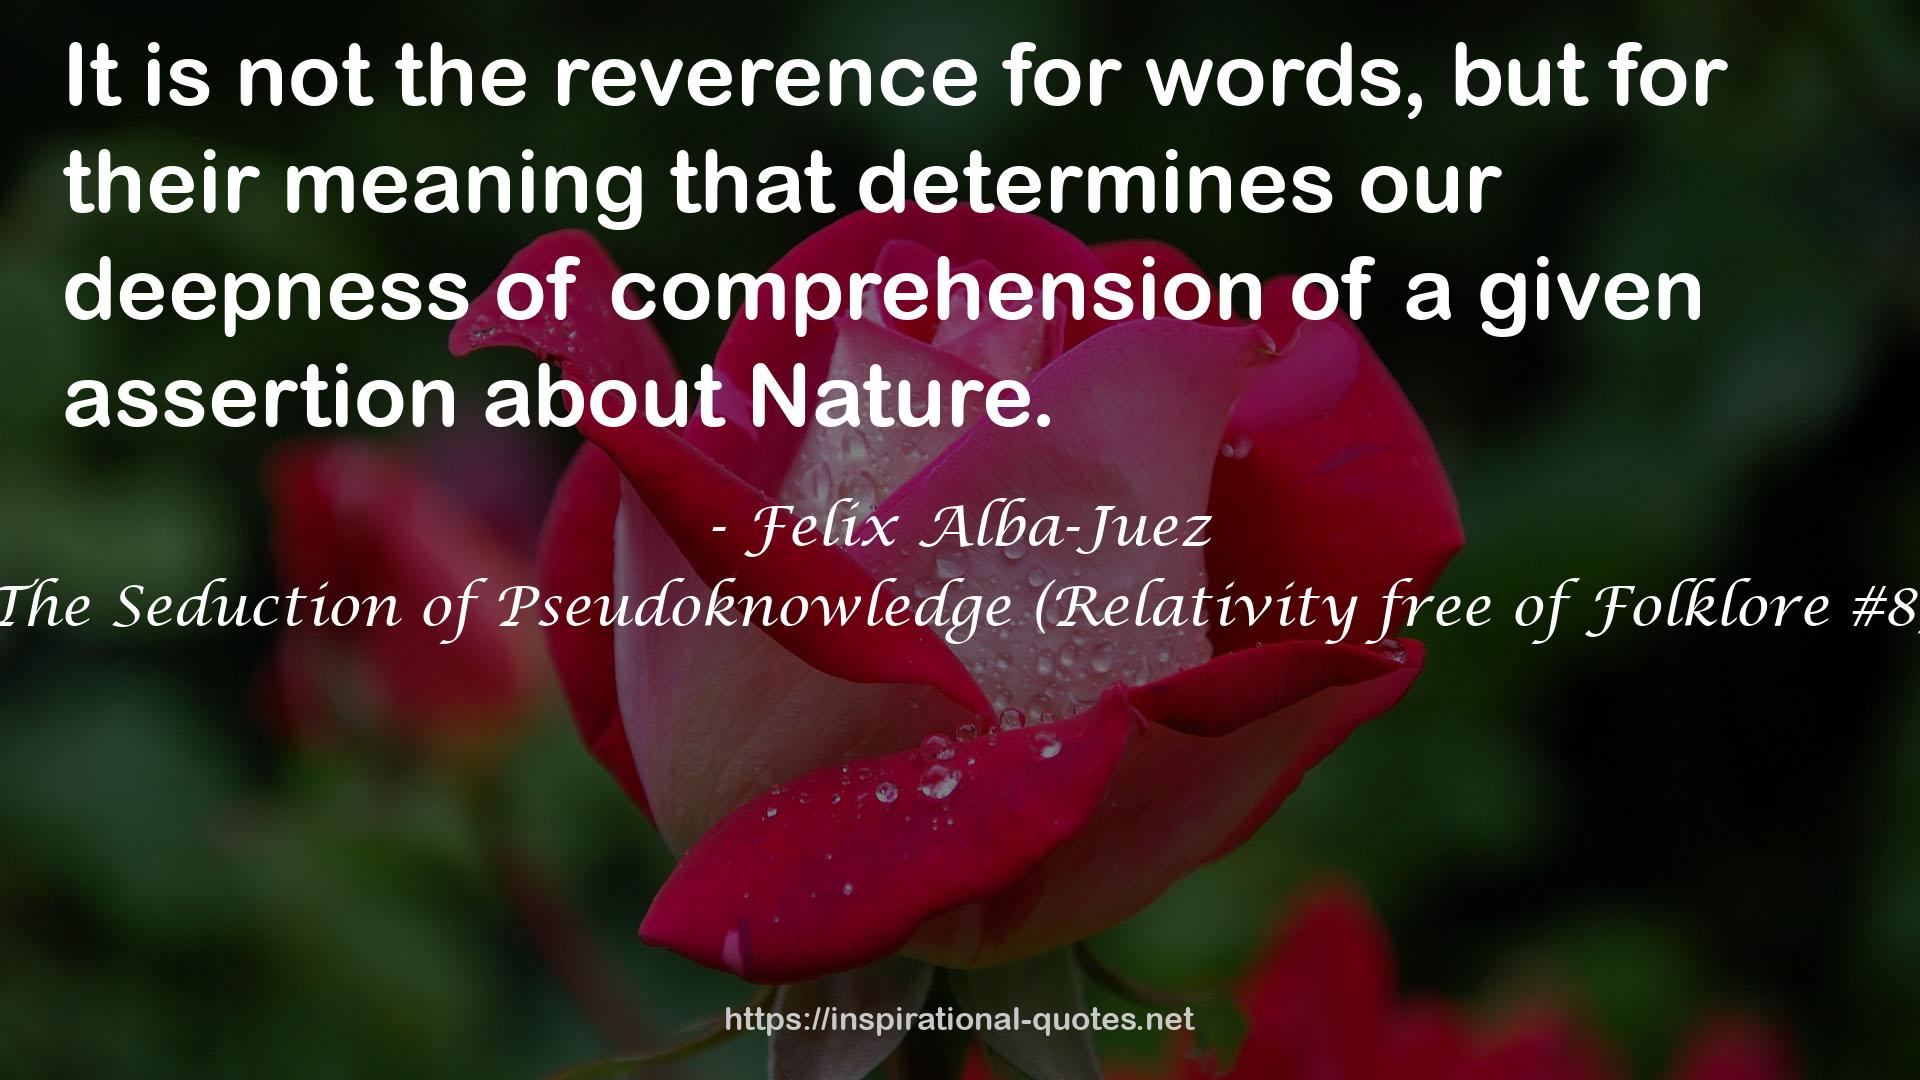 The Seduction of Pseudoknowledge (Relativity free of Folklore #8) QUOTES